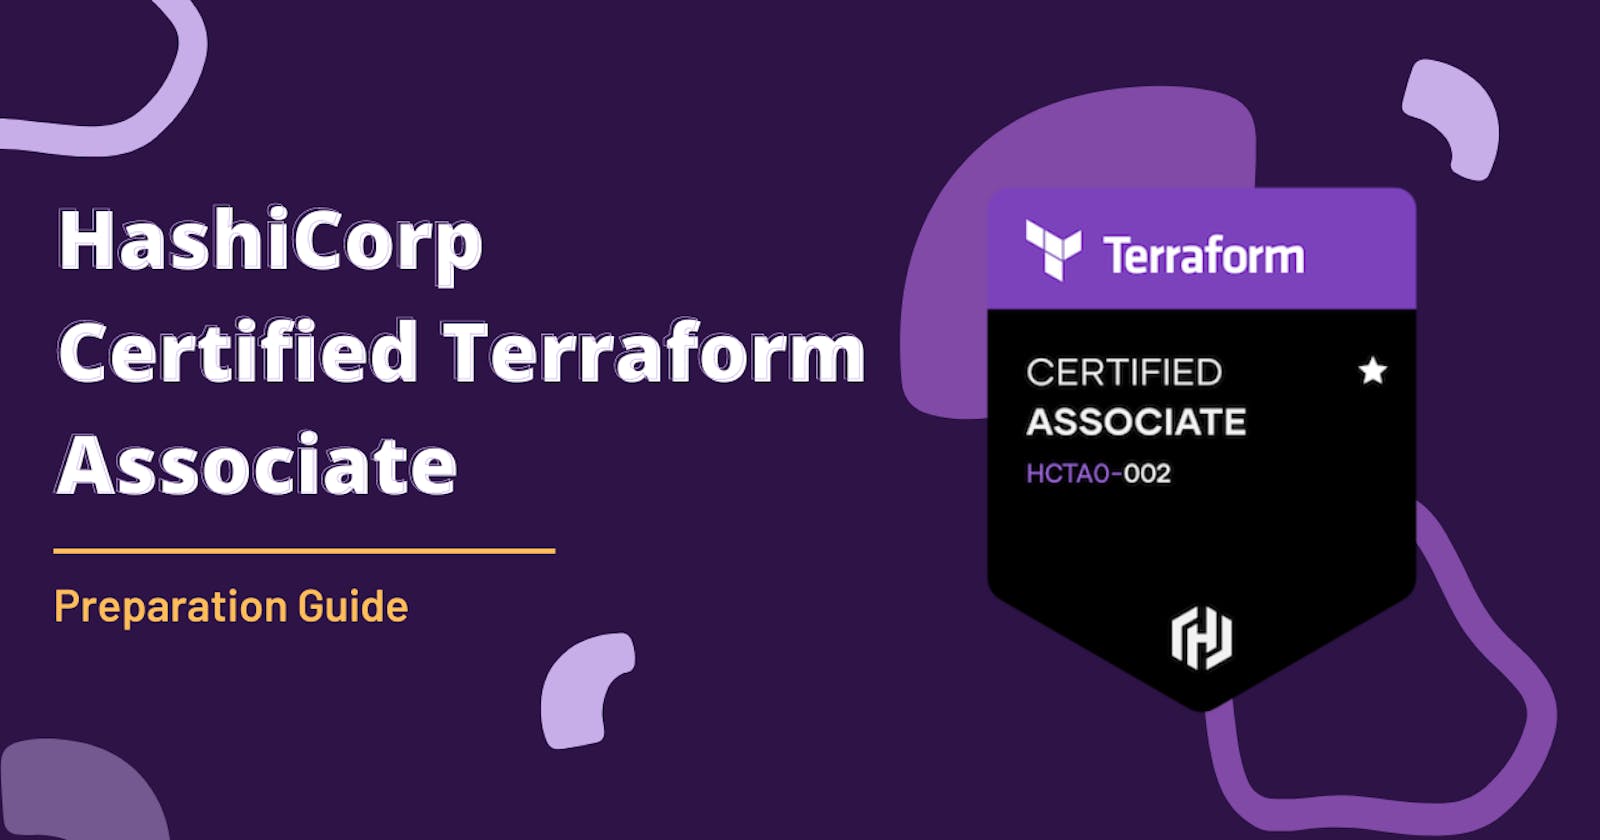 Become a Hashicorp Certified Terraform Associate - Preparation Guide